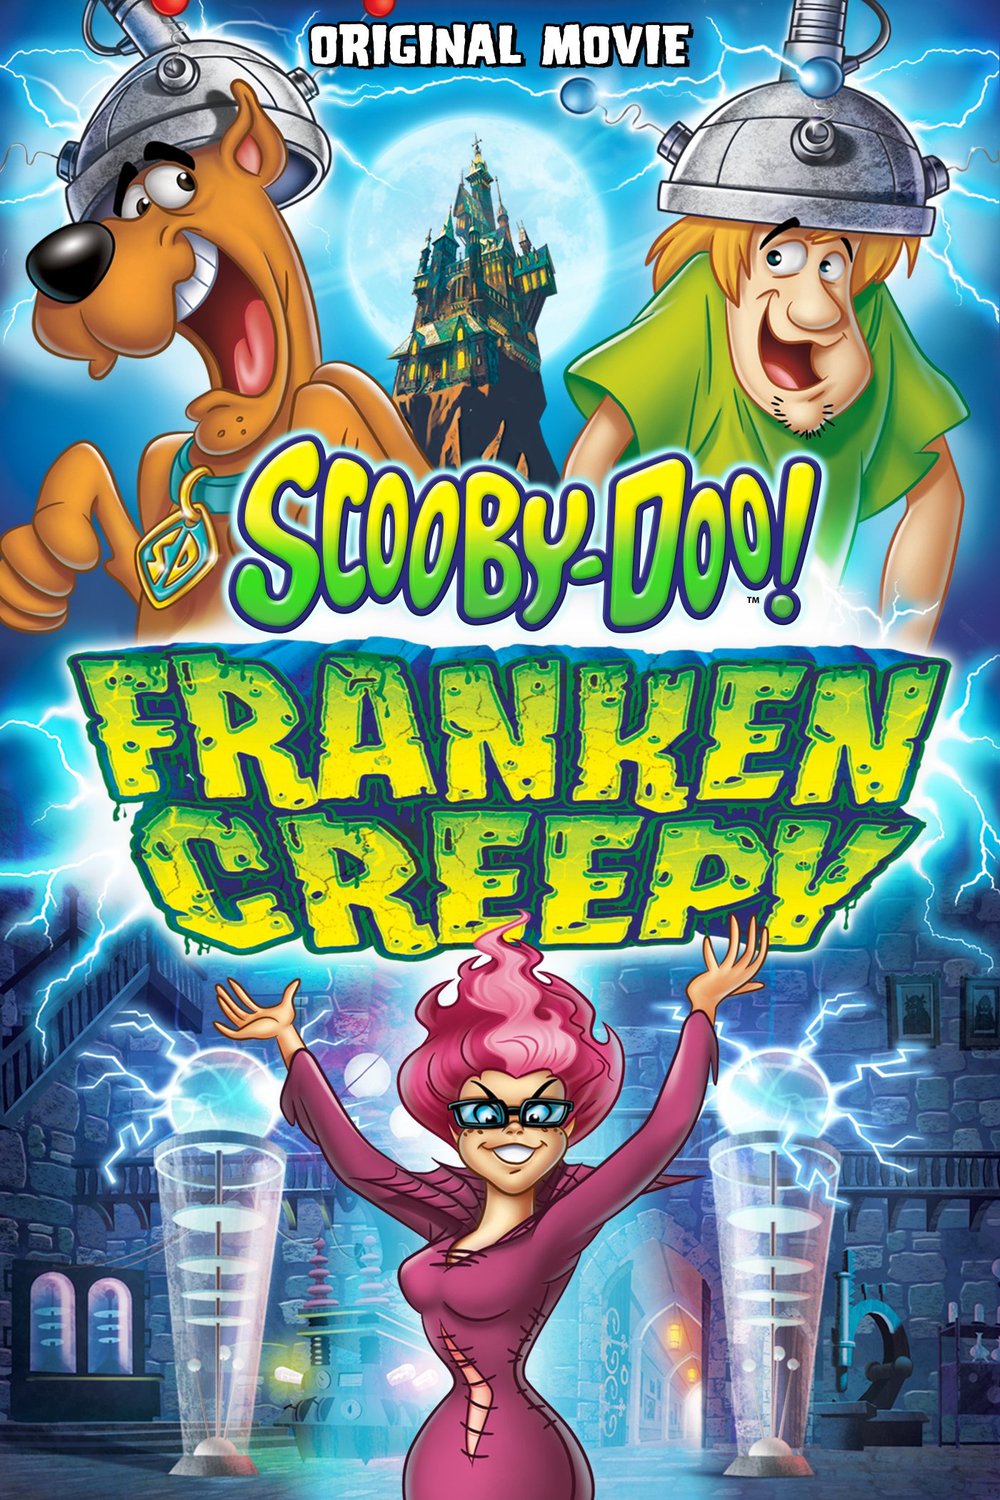 Poster of the movie Scooby-Doo! FrankenCreepy